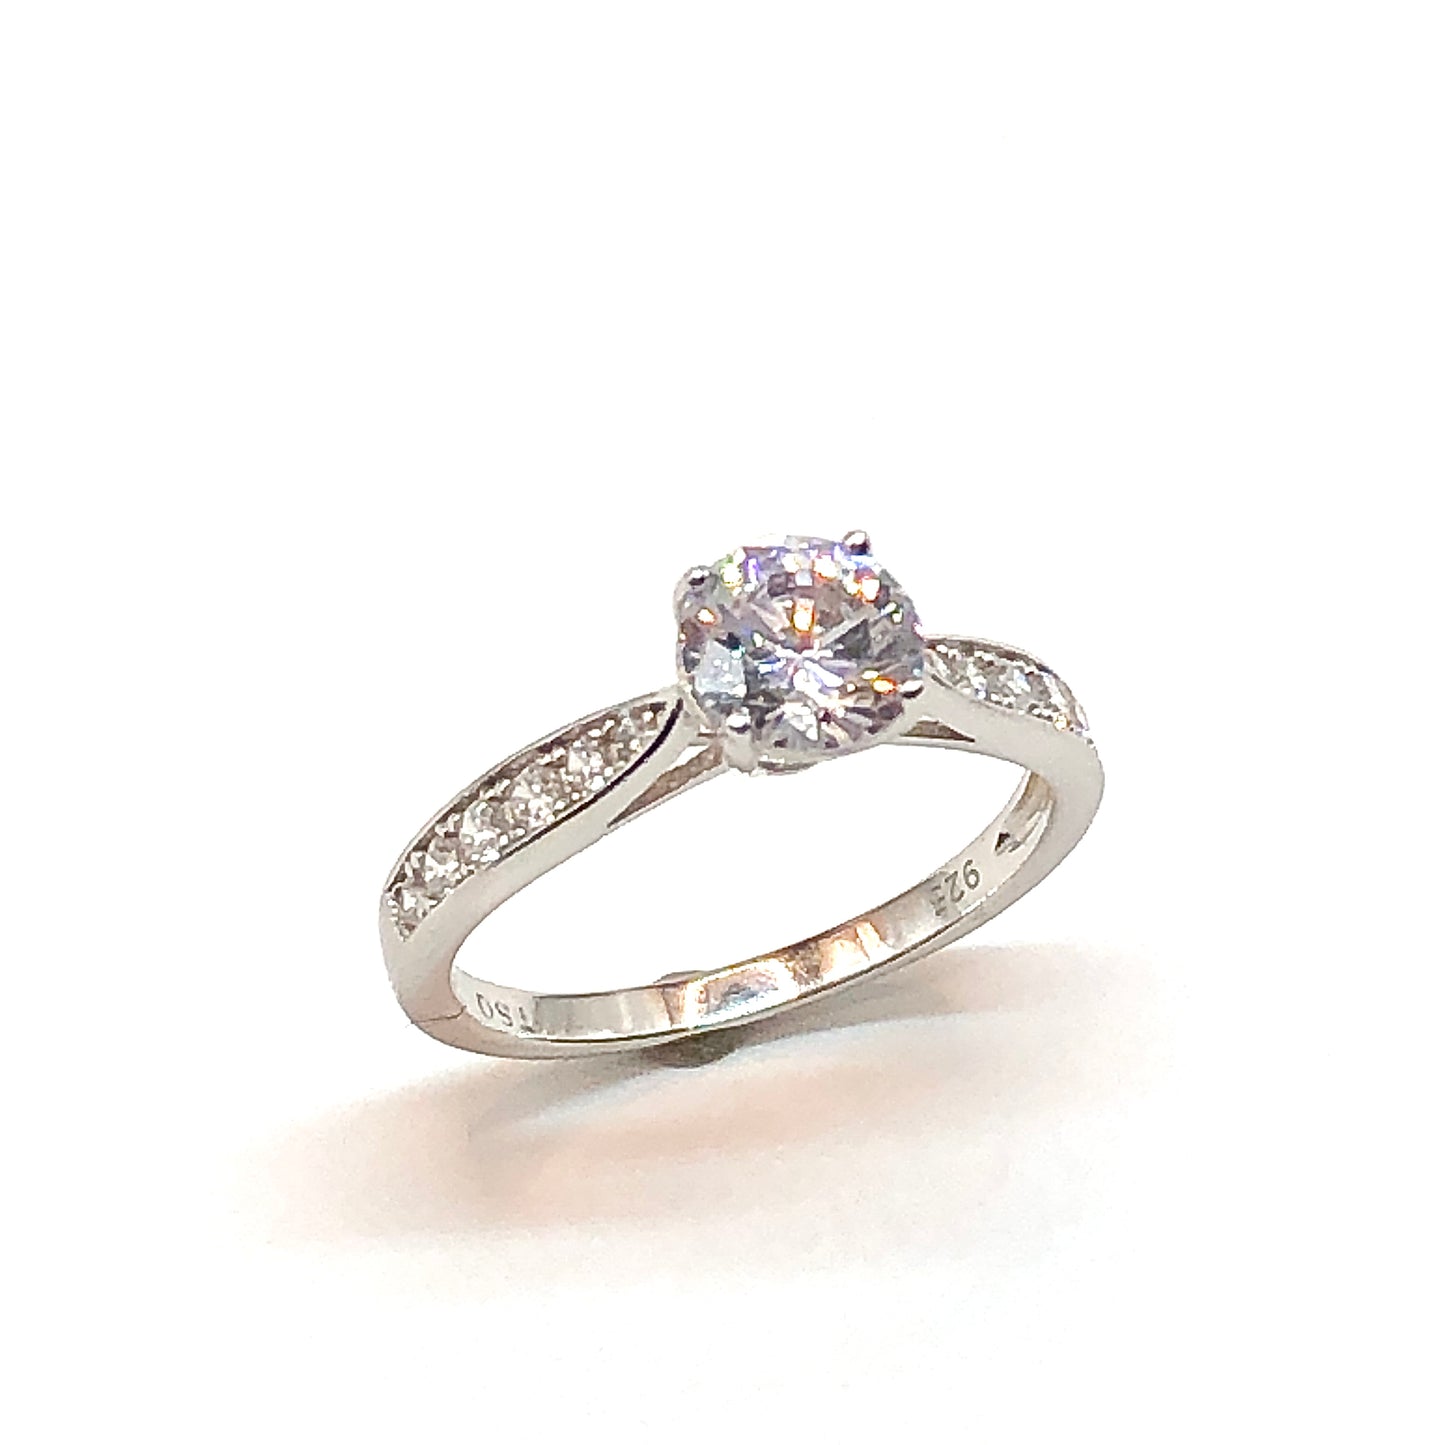  Silver Ring | Cocktail Ring | Womens 925 Sterling Stunning Sparkly Solitaire Ring